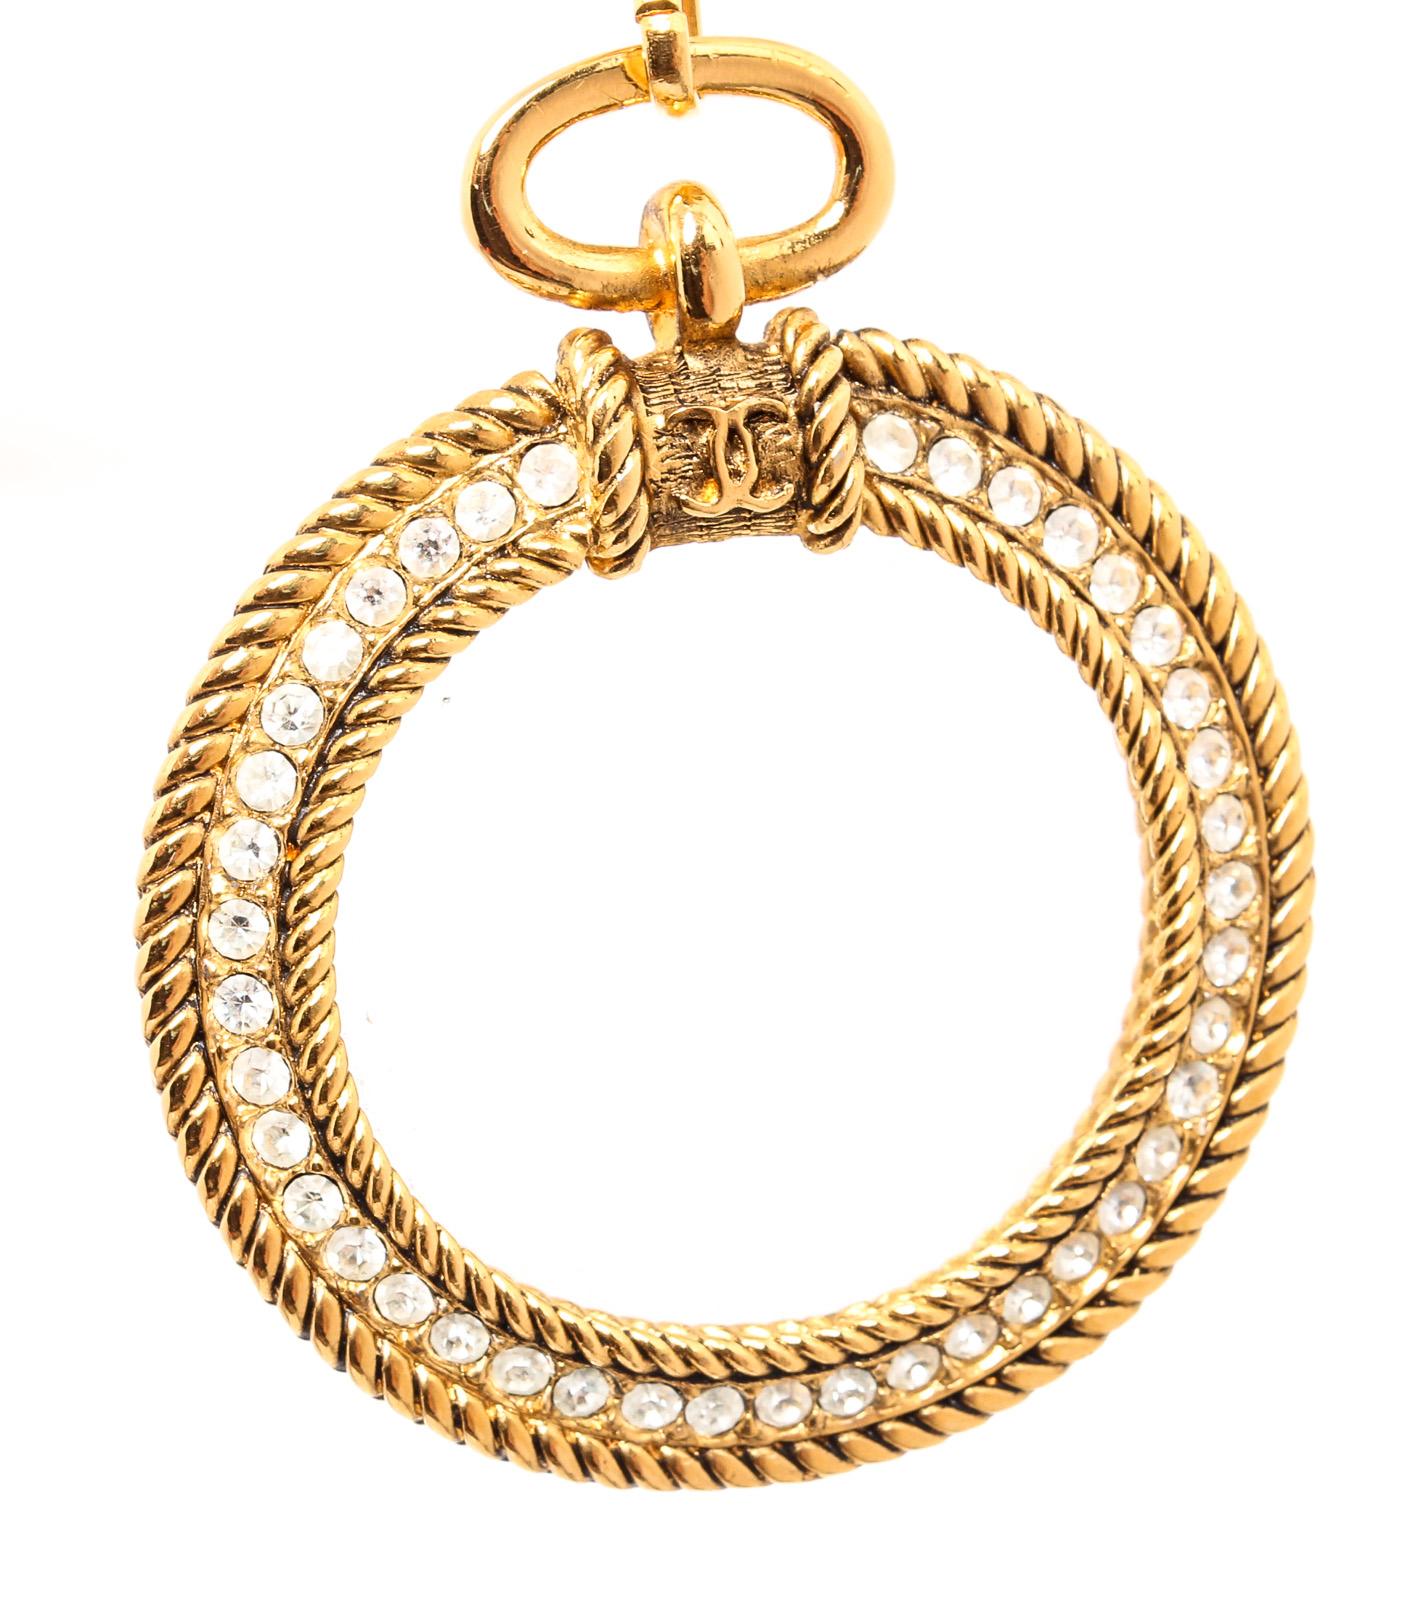 Gold-tone chain link with faux pearl and rhinestone details and magnifying CC glass pendant and a large spring clasp closure.

24134MSC